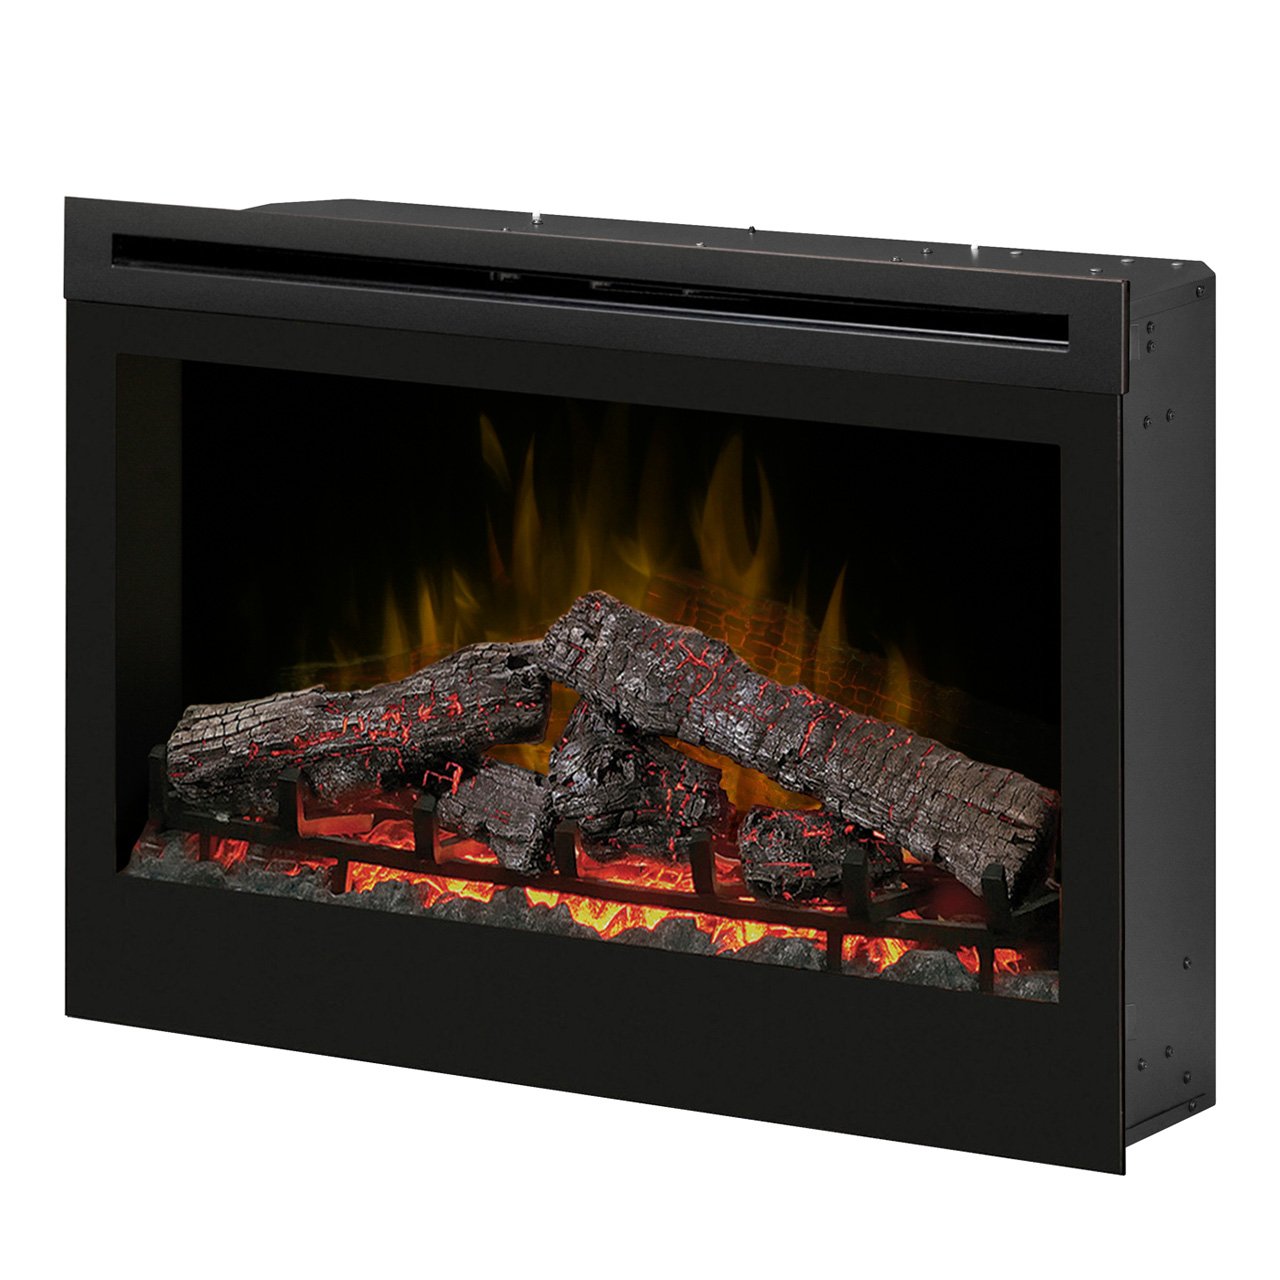 Wood Pellet Fireplace Insert Lovely Dimplex Df3033st 33 Inch Self Trimming Electric Fireplace Insert